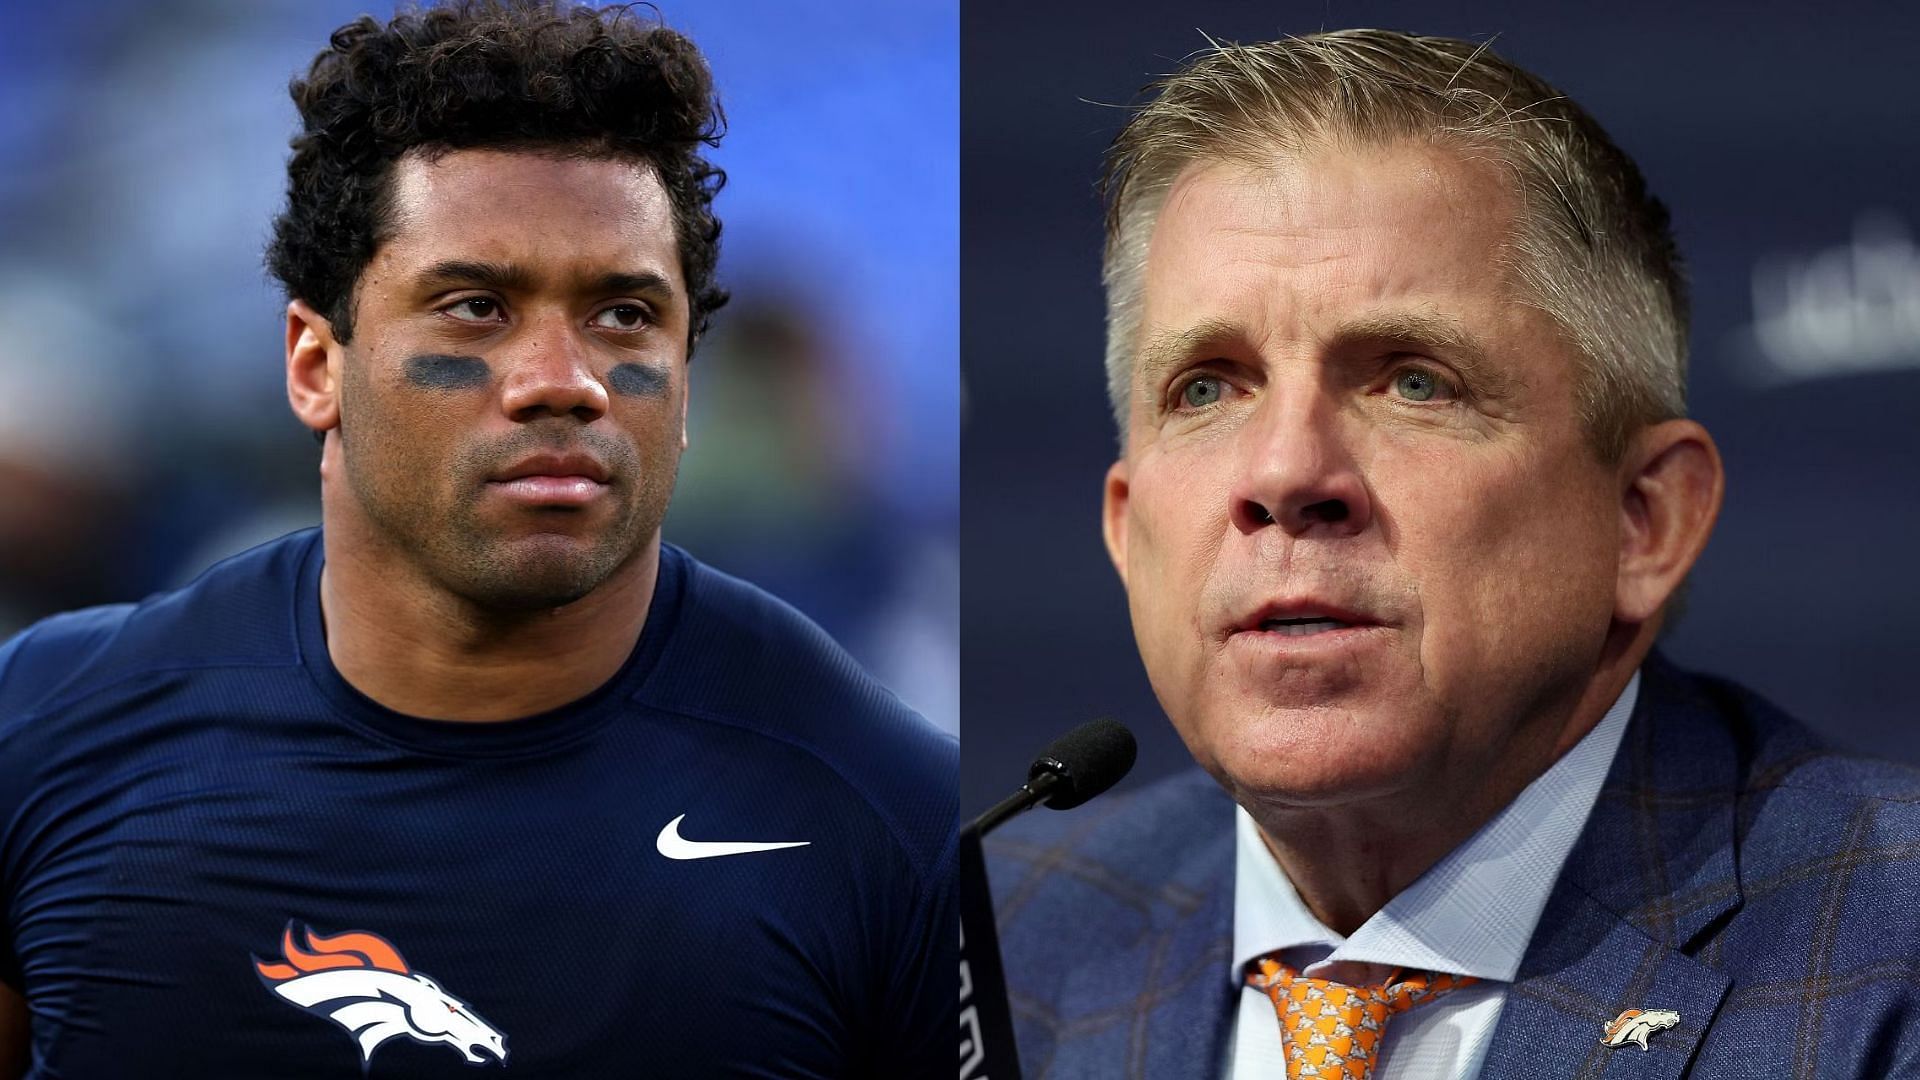 Super Bowl-winning coach Sean Payton joined Russell Wilson and the Denver Broncos this offseason.